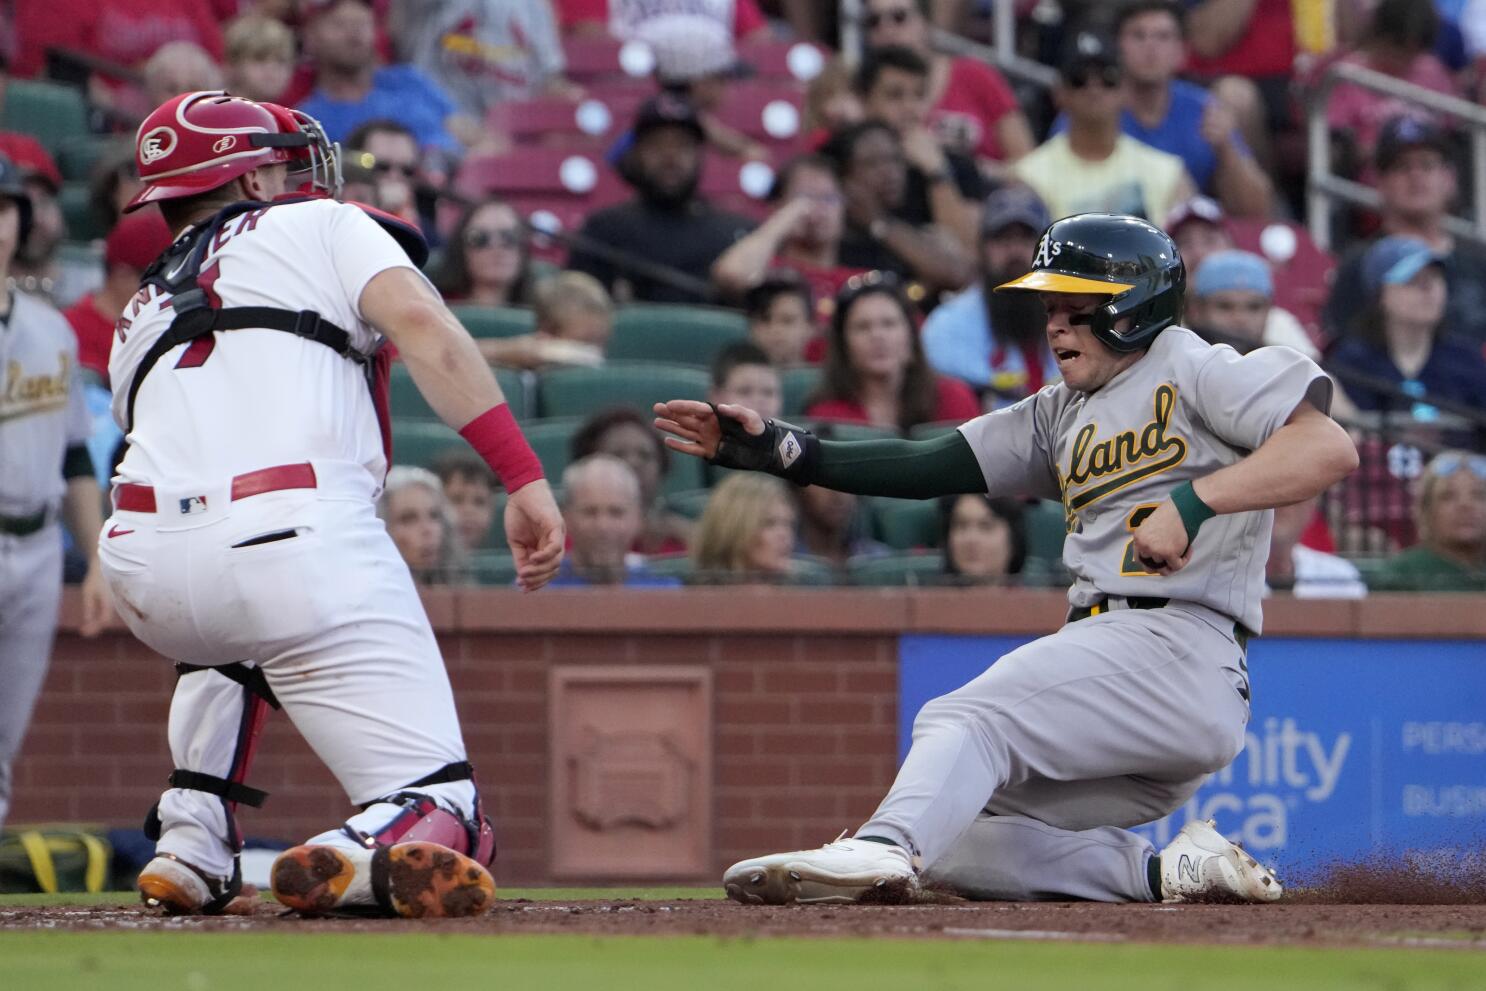 Gelof slugs 4 hits as the Athletics snap a 9-game road skid with